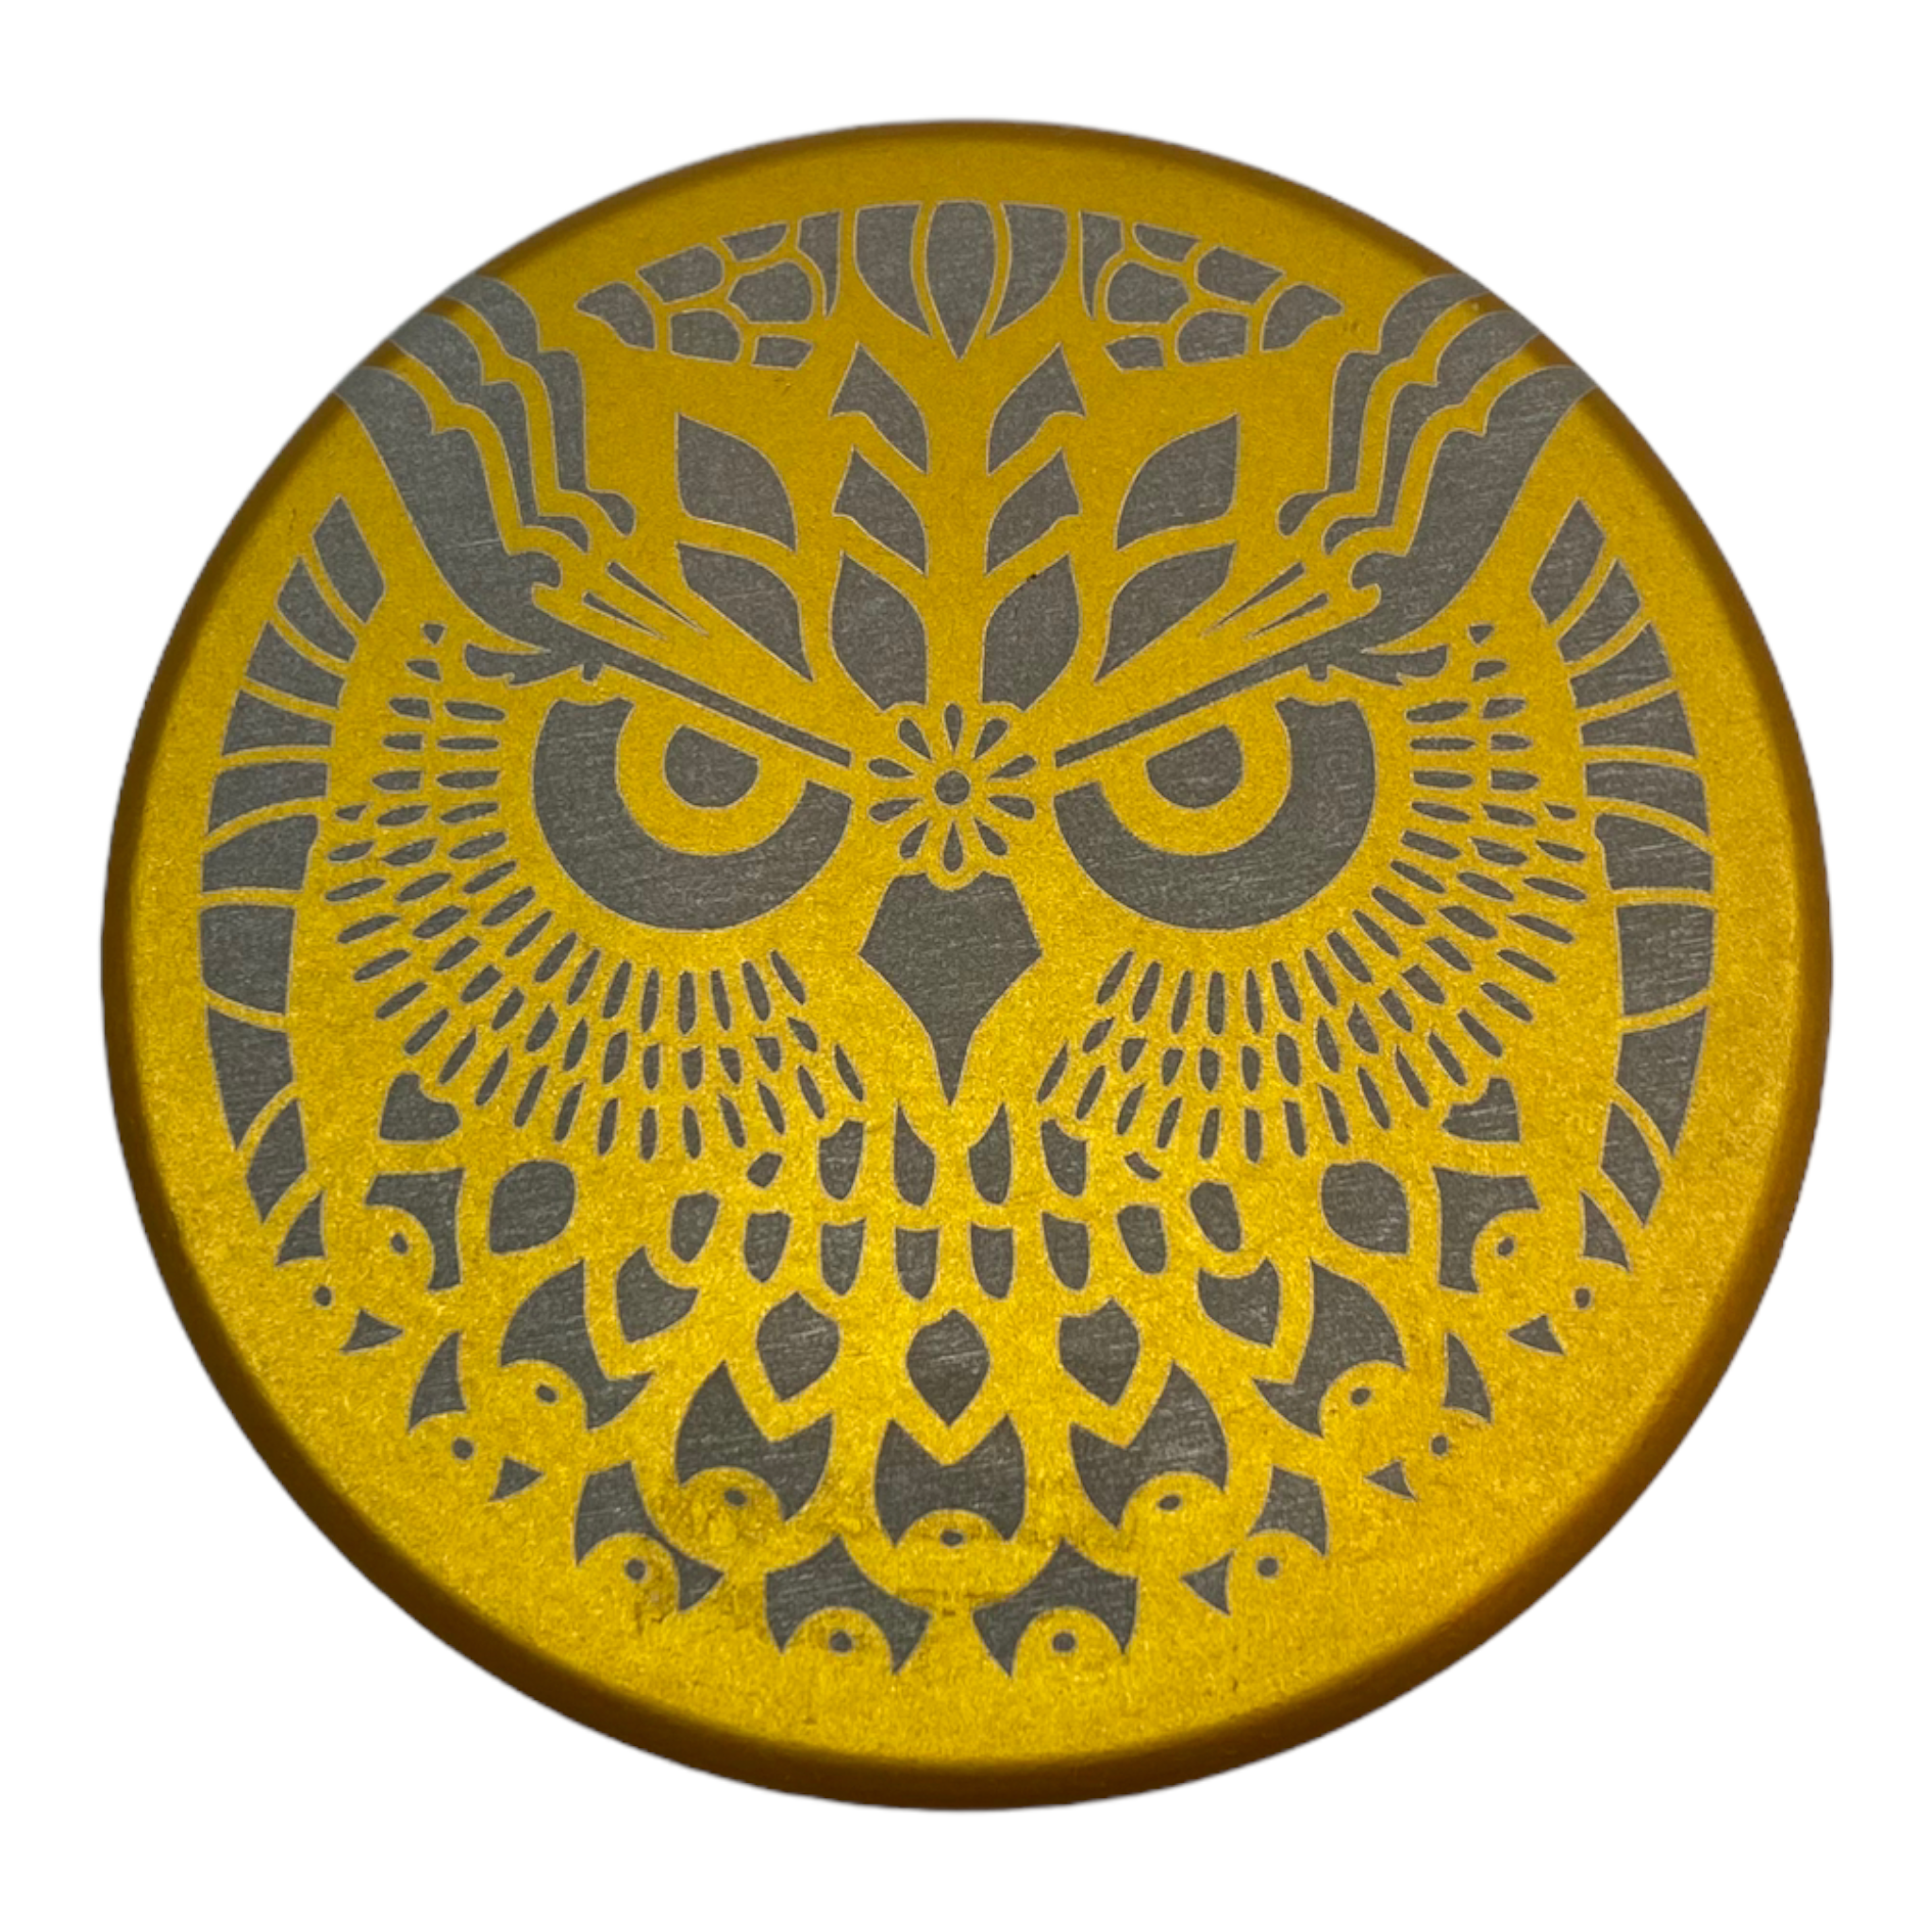 Tahoe Grinders - Gold Anodized Aluminum Large Two Piece Herb Grinder With Owl Face